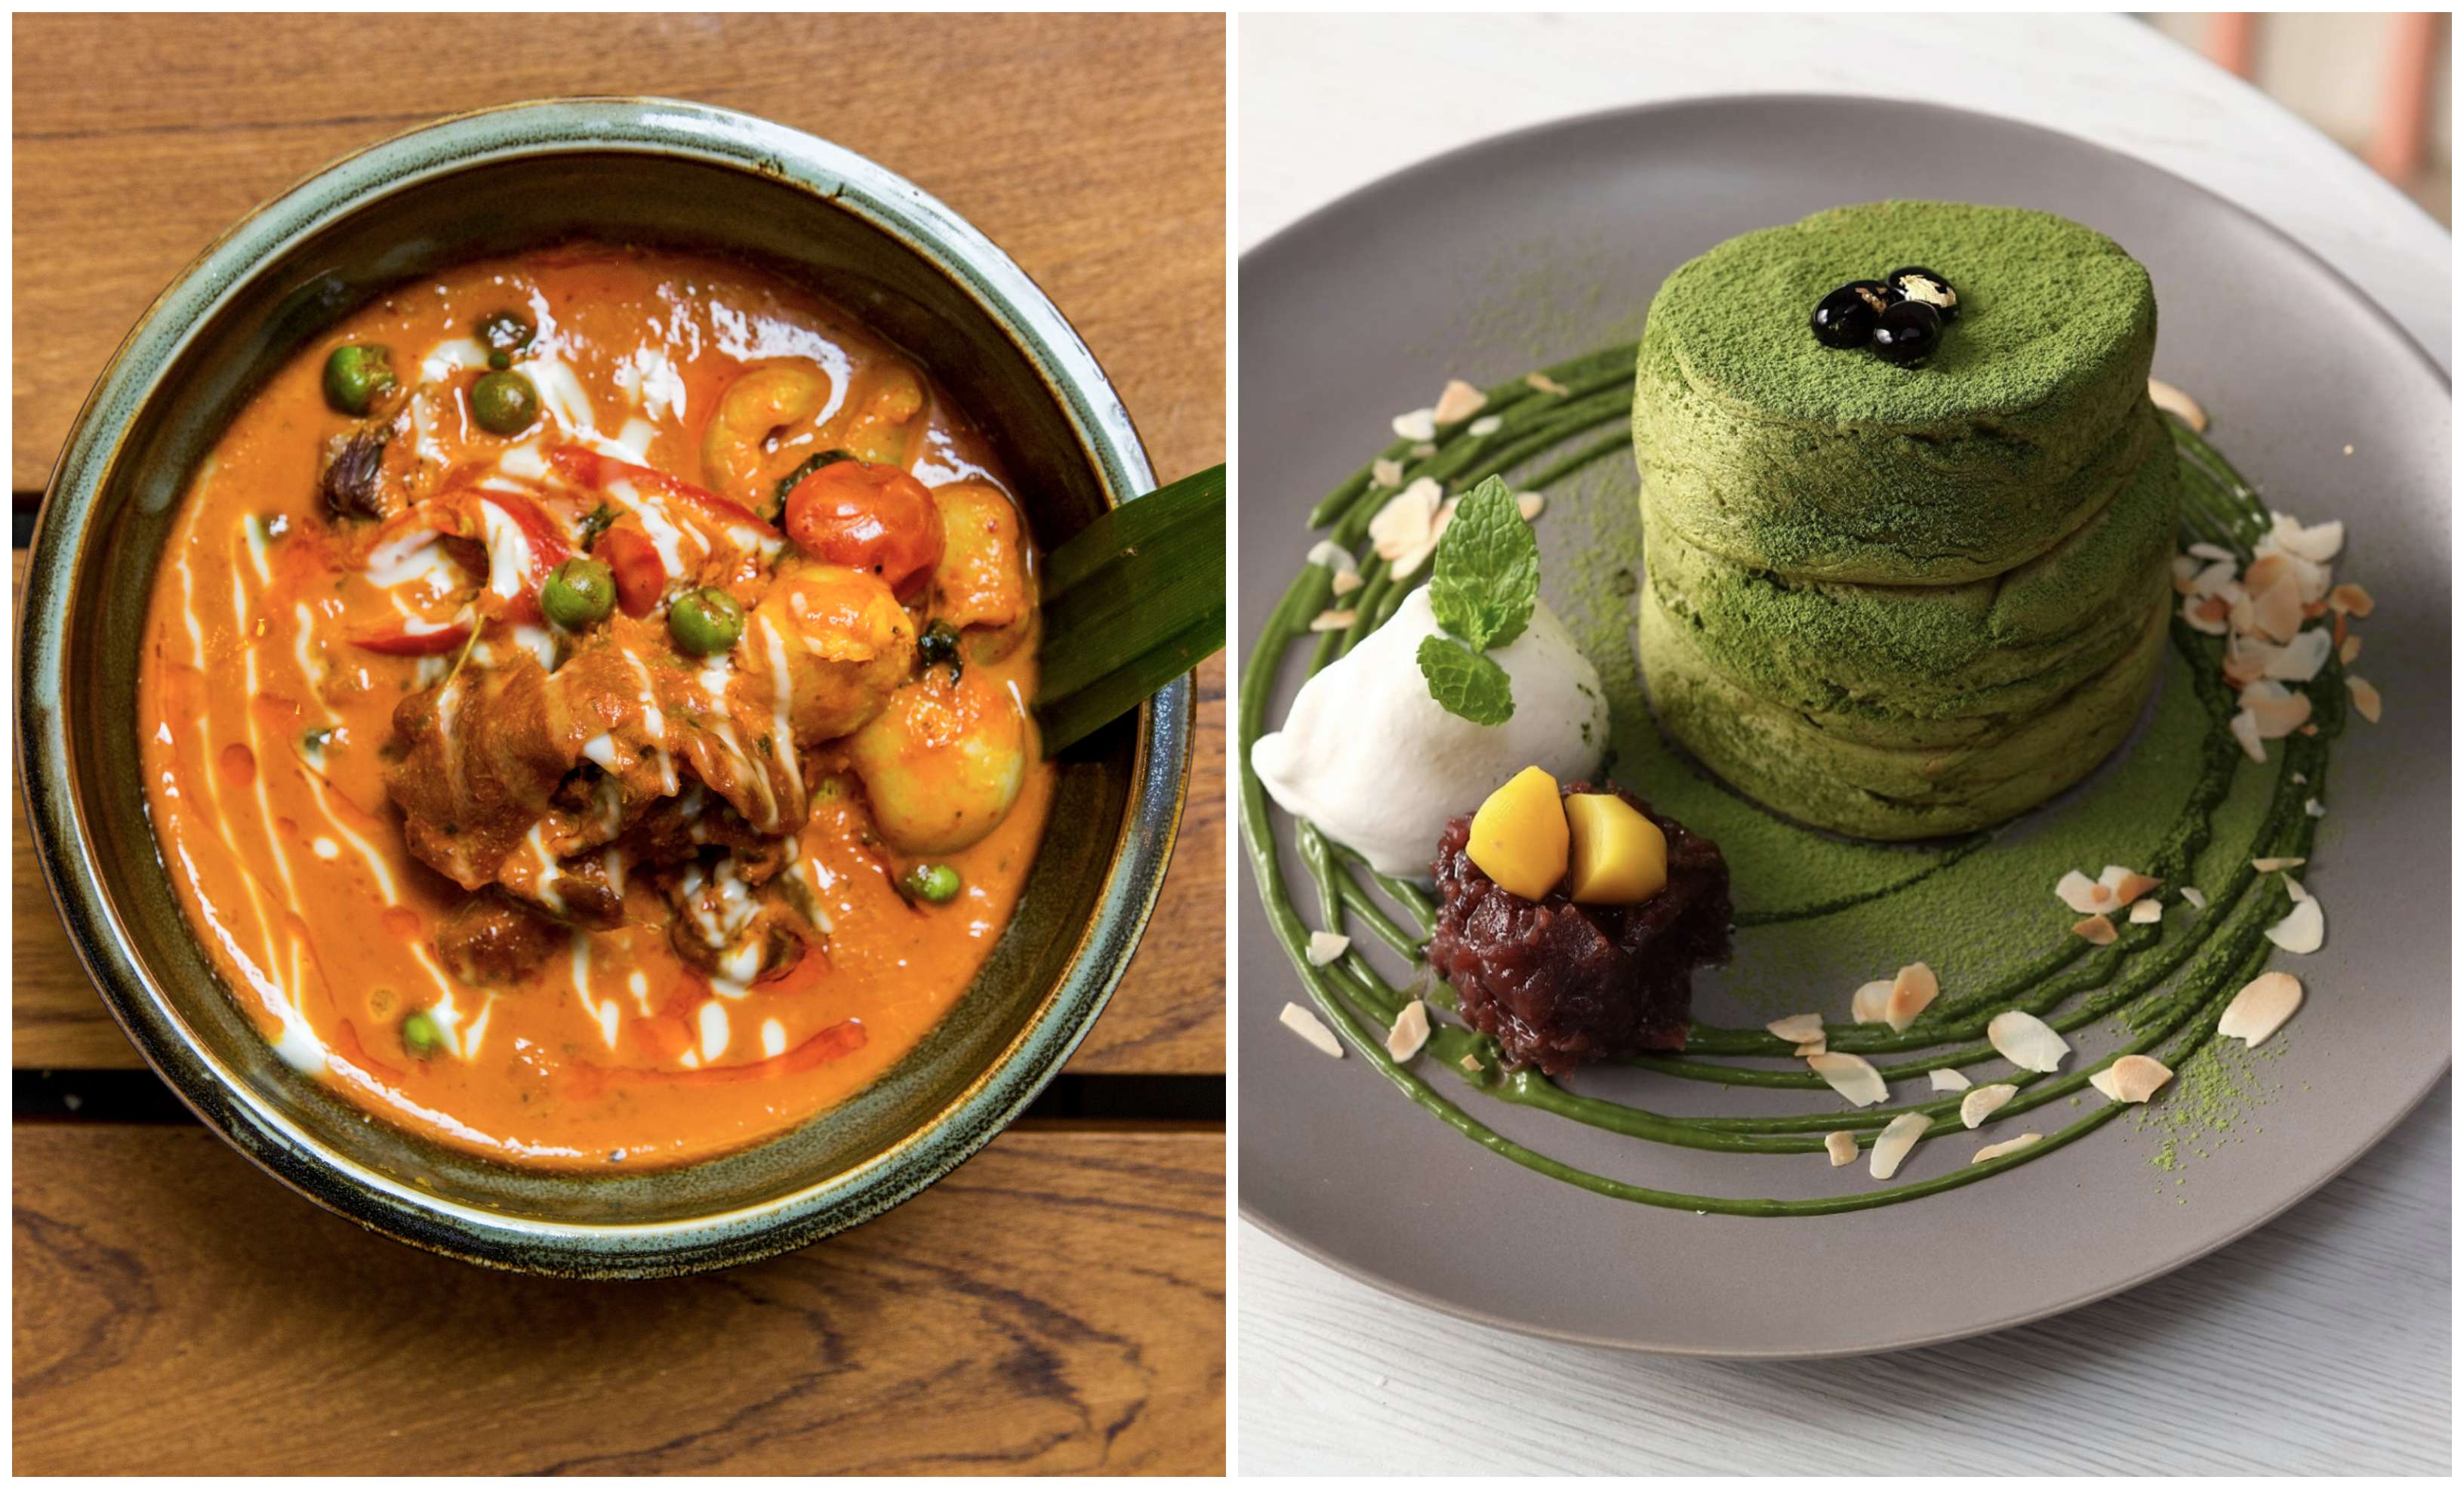 The duck and lychee red curry at Ruam (left), and the matcha fluffy pancakes at Micasadeco (right). Photos via Ruam/Micasadeco.